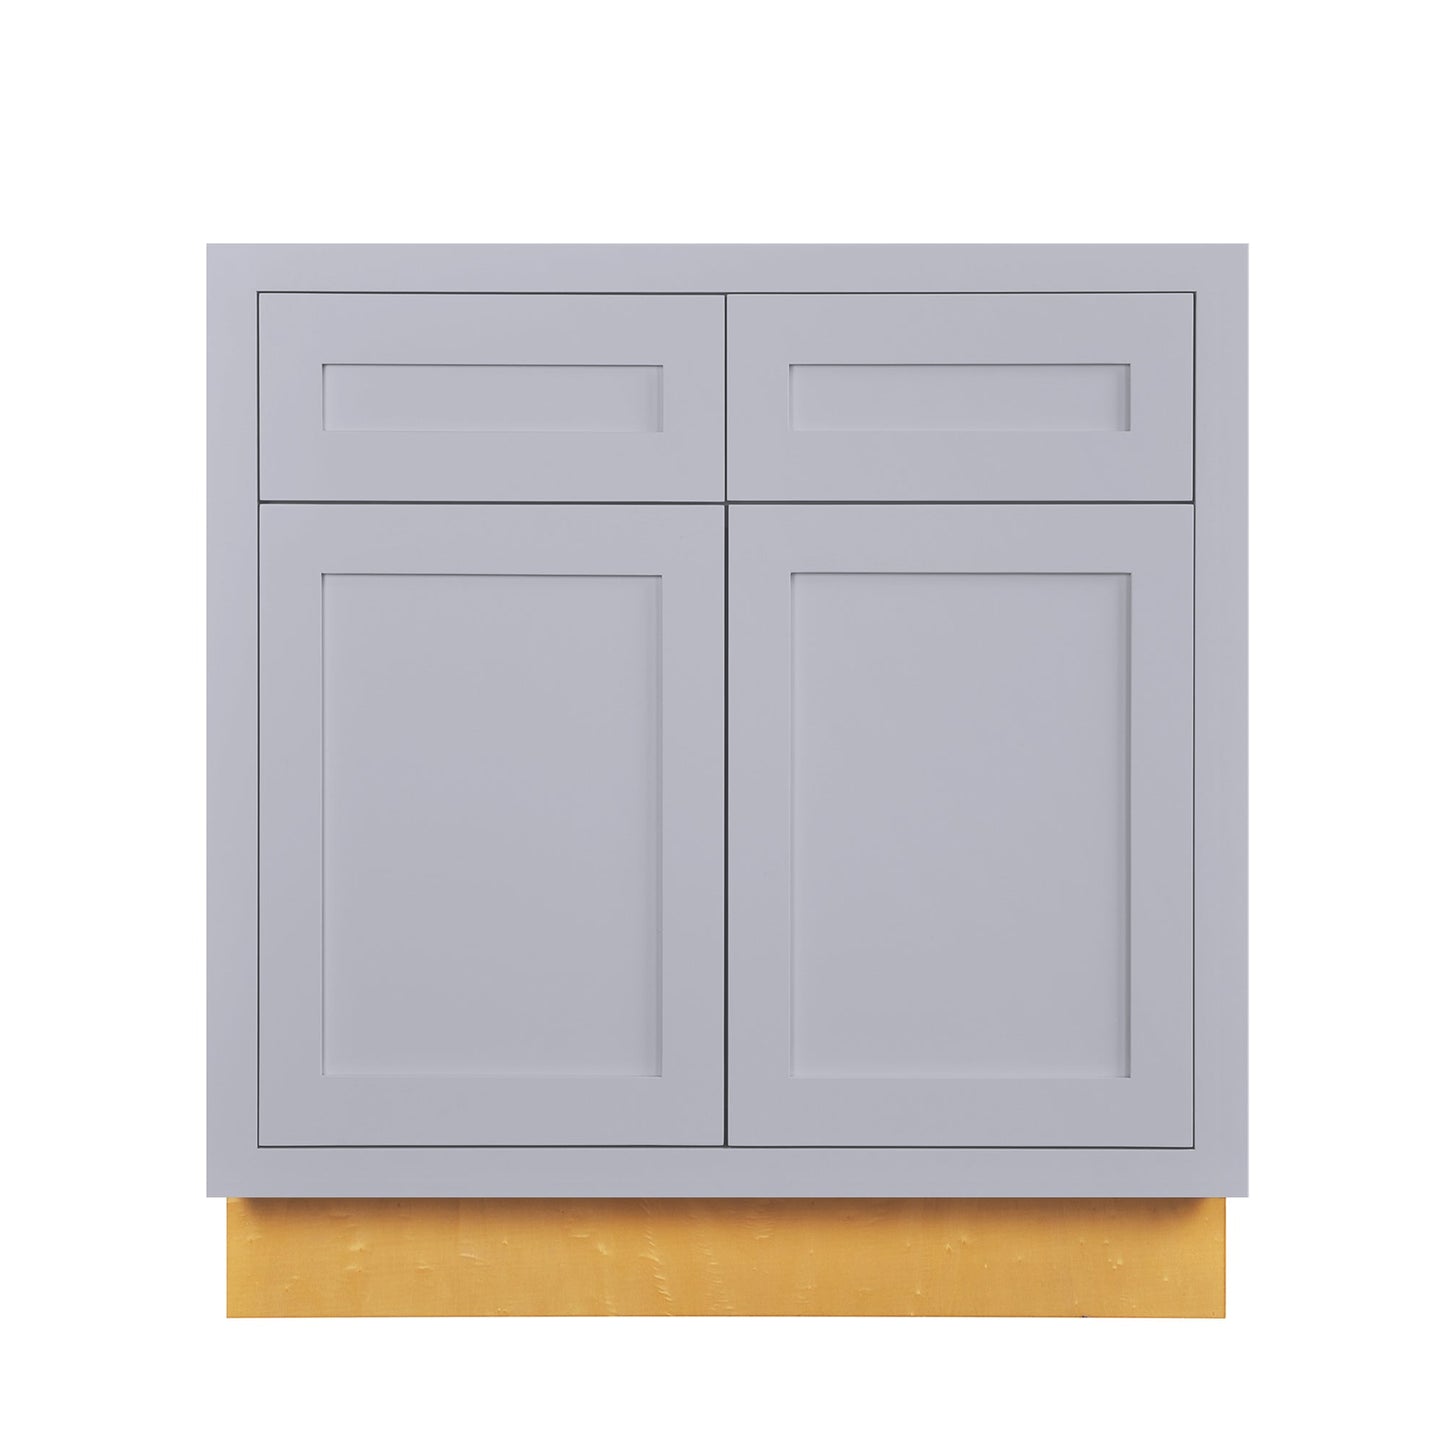 Maplevilles Cabinetry 33" Light Gray Inset Modern Shaker Style RTA Birch Wood Storage Base Kitchen Cabinet With 2 Drawers & 2 Doors